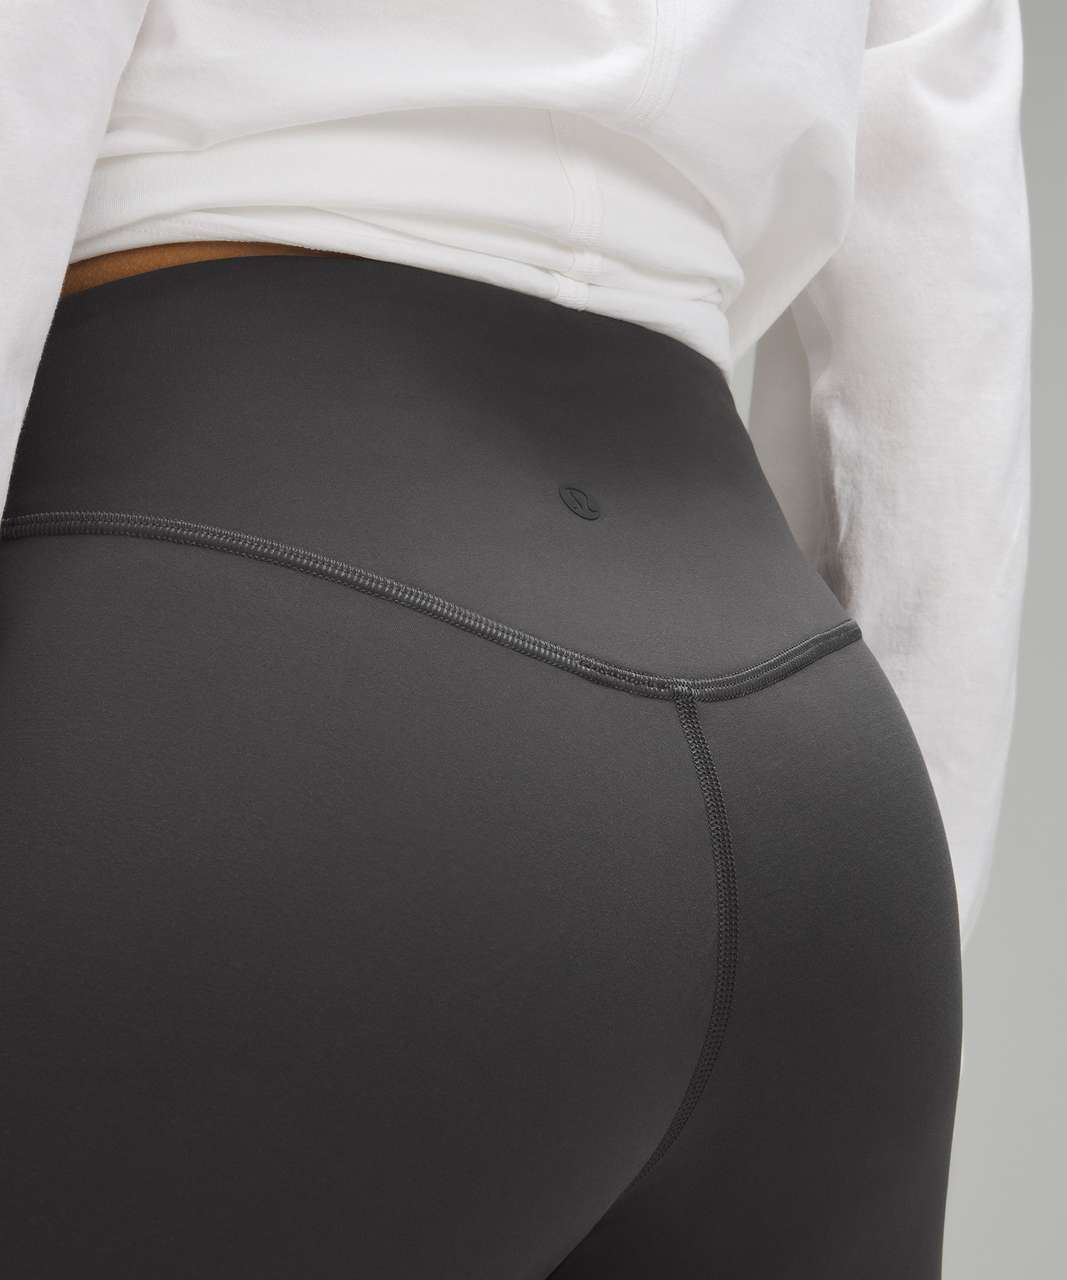 Lululemon Wunder Under SmoothCover High-Rise Tight 25" - Graphite Grey